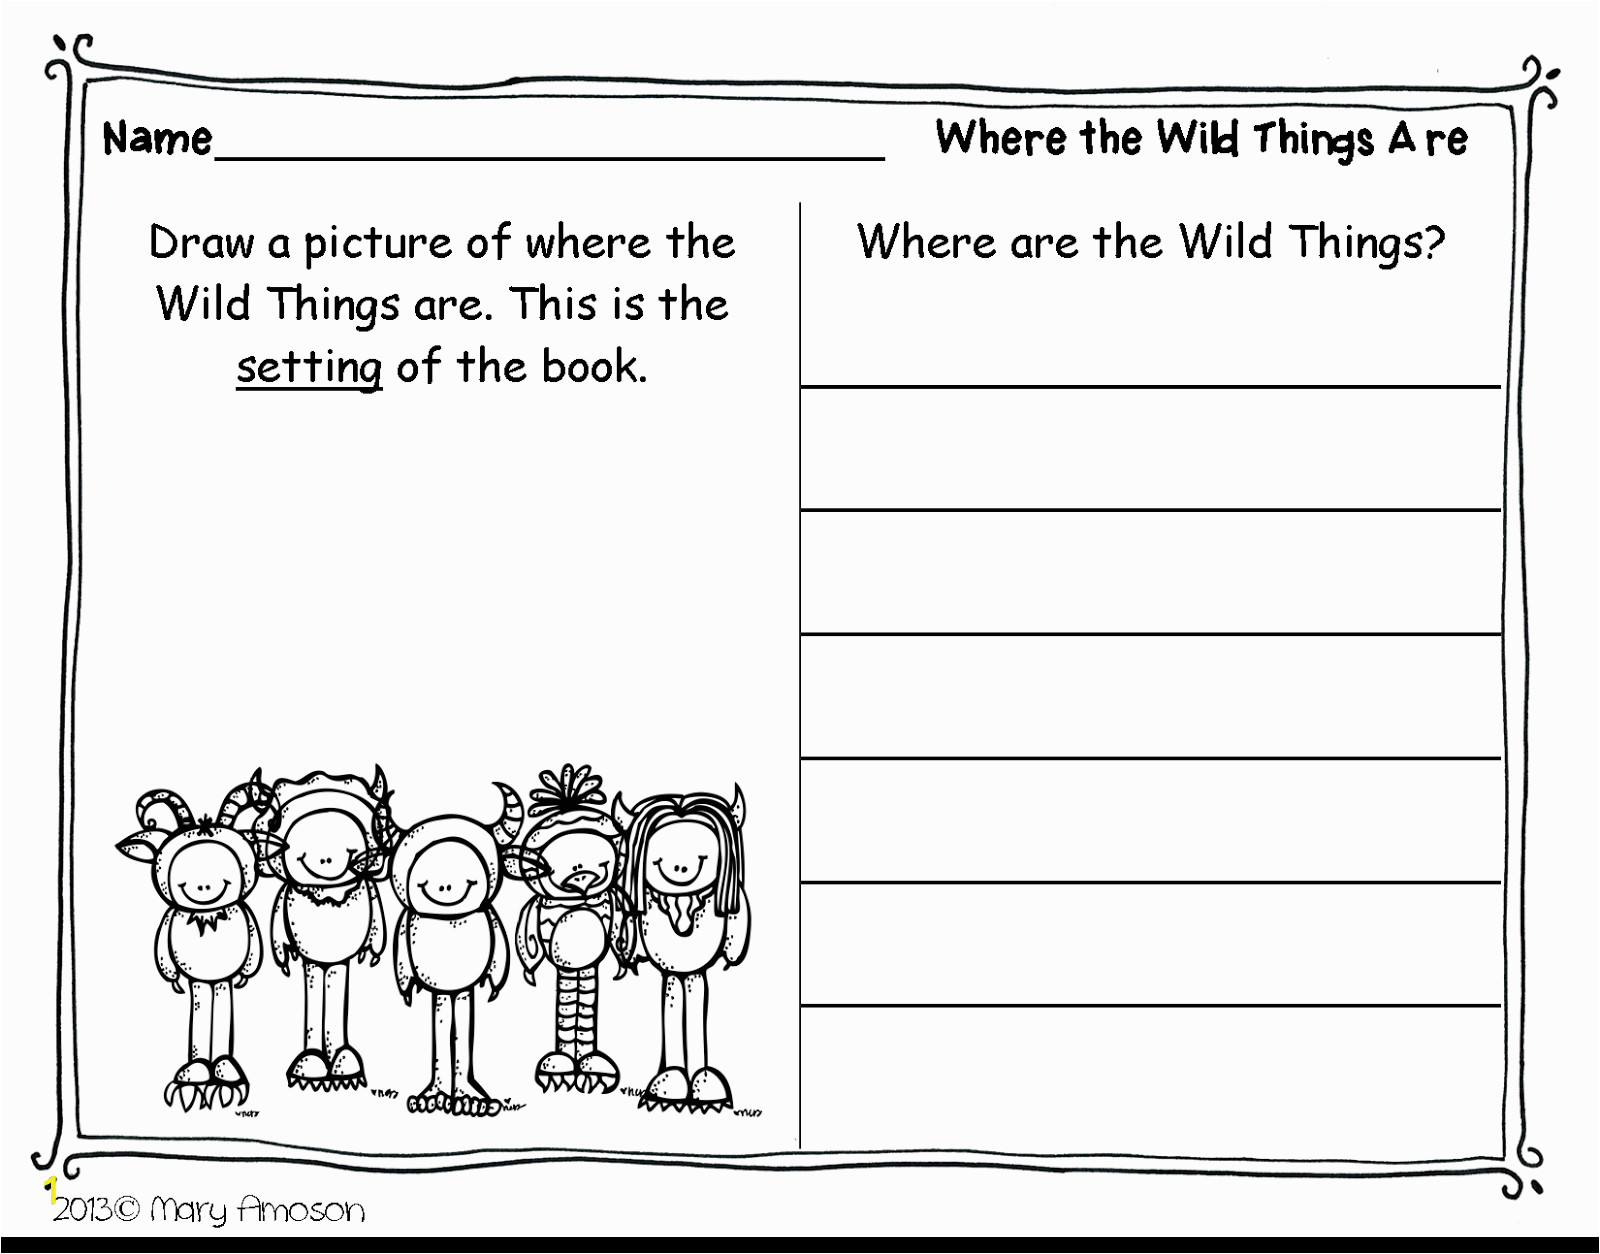 Where the Wild Things are Black and White Coloring Pages Freebielicious where the Wild Things are Freebie